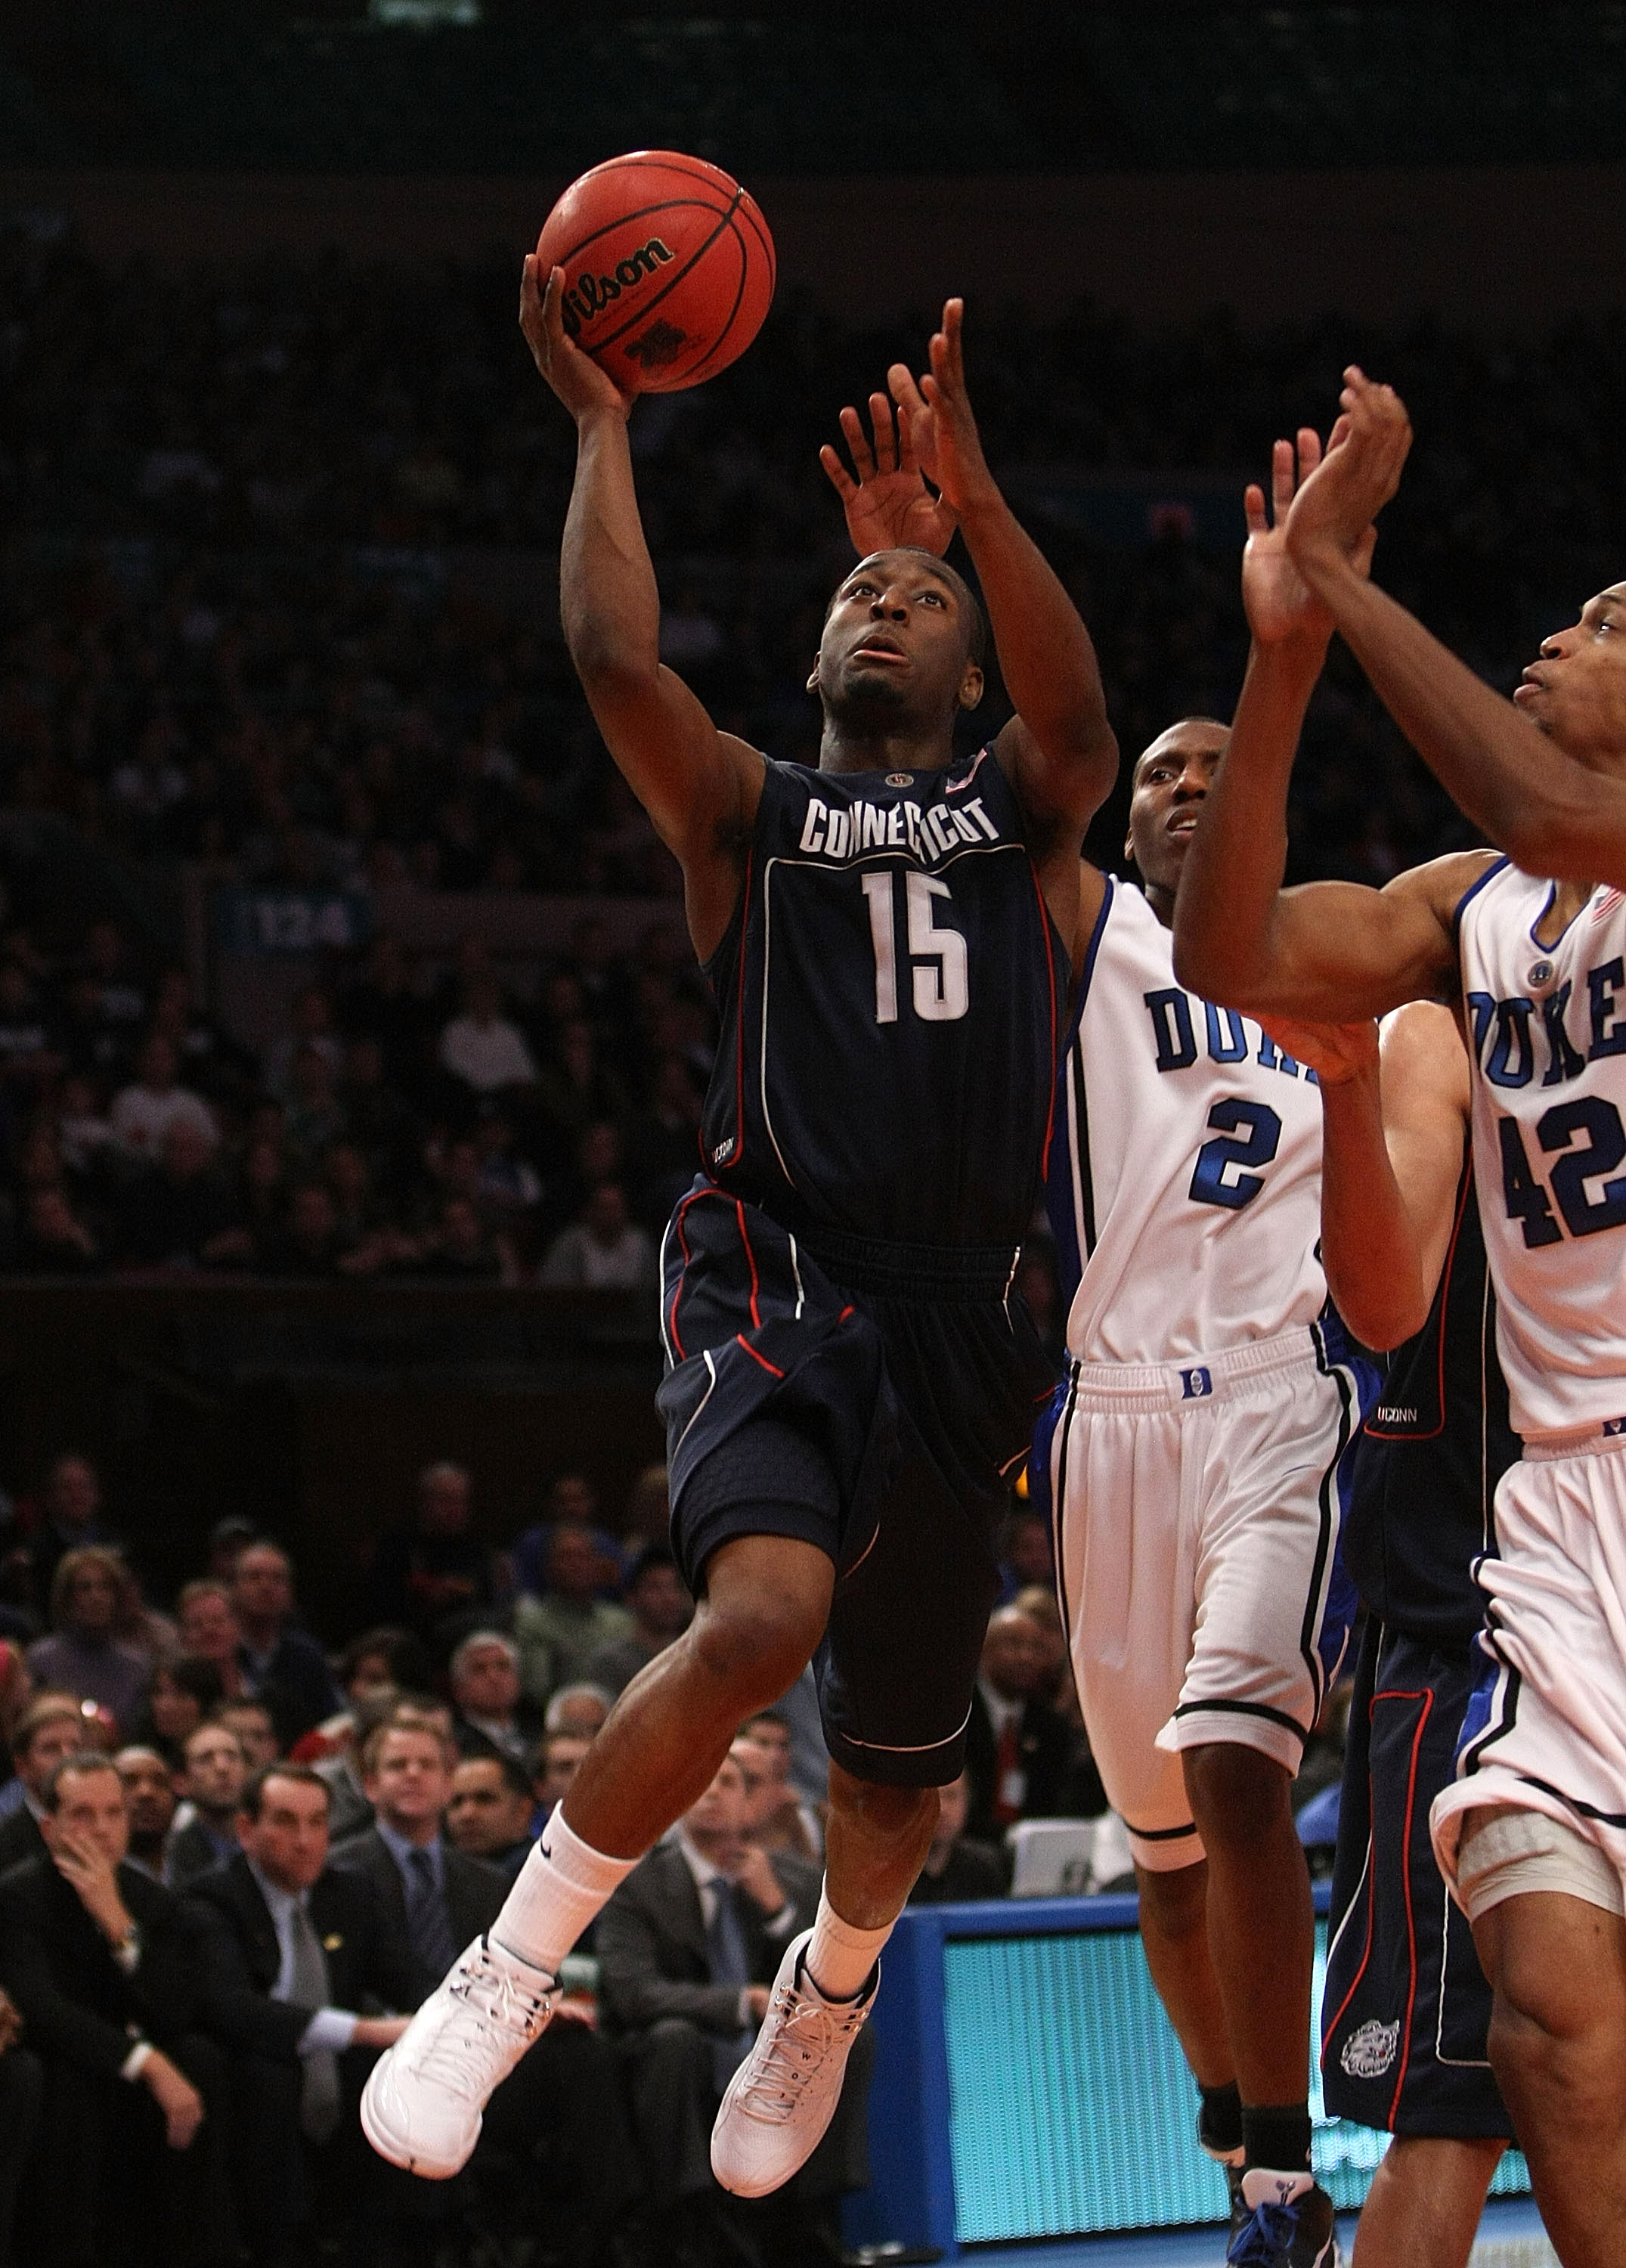 NEW YORK - NOVEMBER 27:  Kemba Walker #15 of the Connecticut Huskies shoots the ball against the Duke Blue Devils  during the Championship game at Madison Square Garden on November 27, 2009 in New York, New York.  (Photo by Nick Laham/Getty Images)